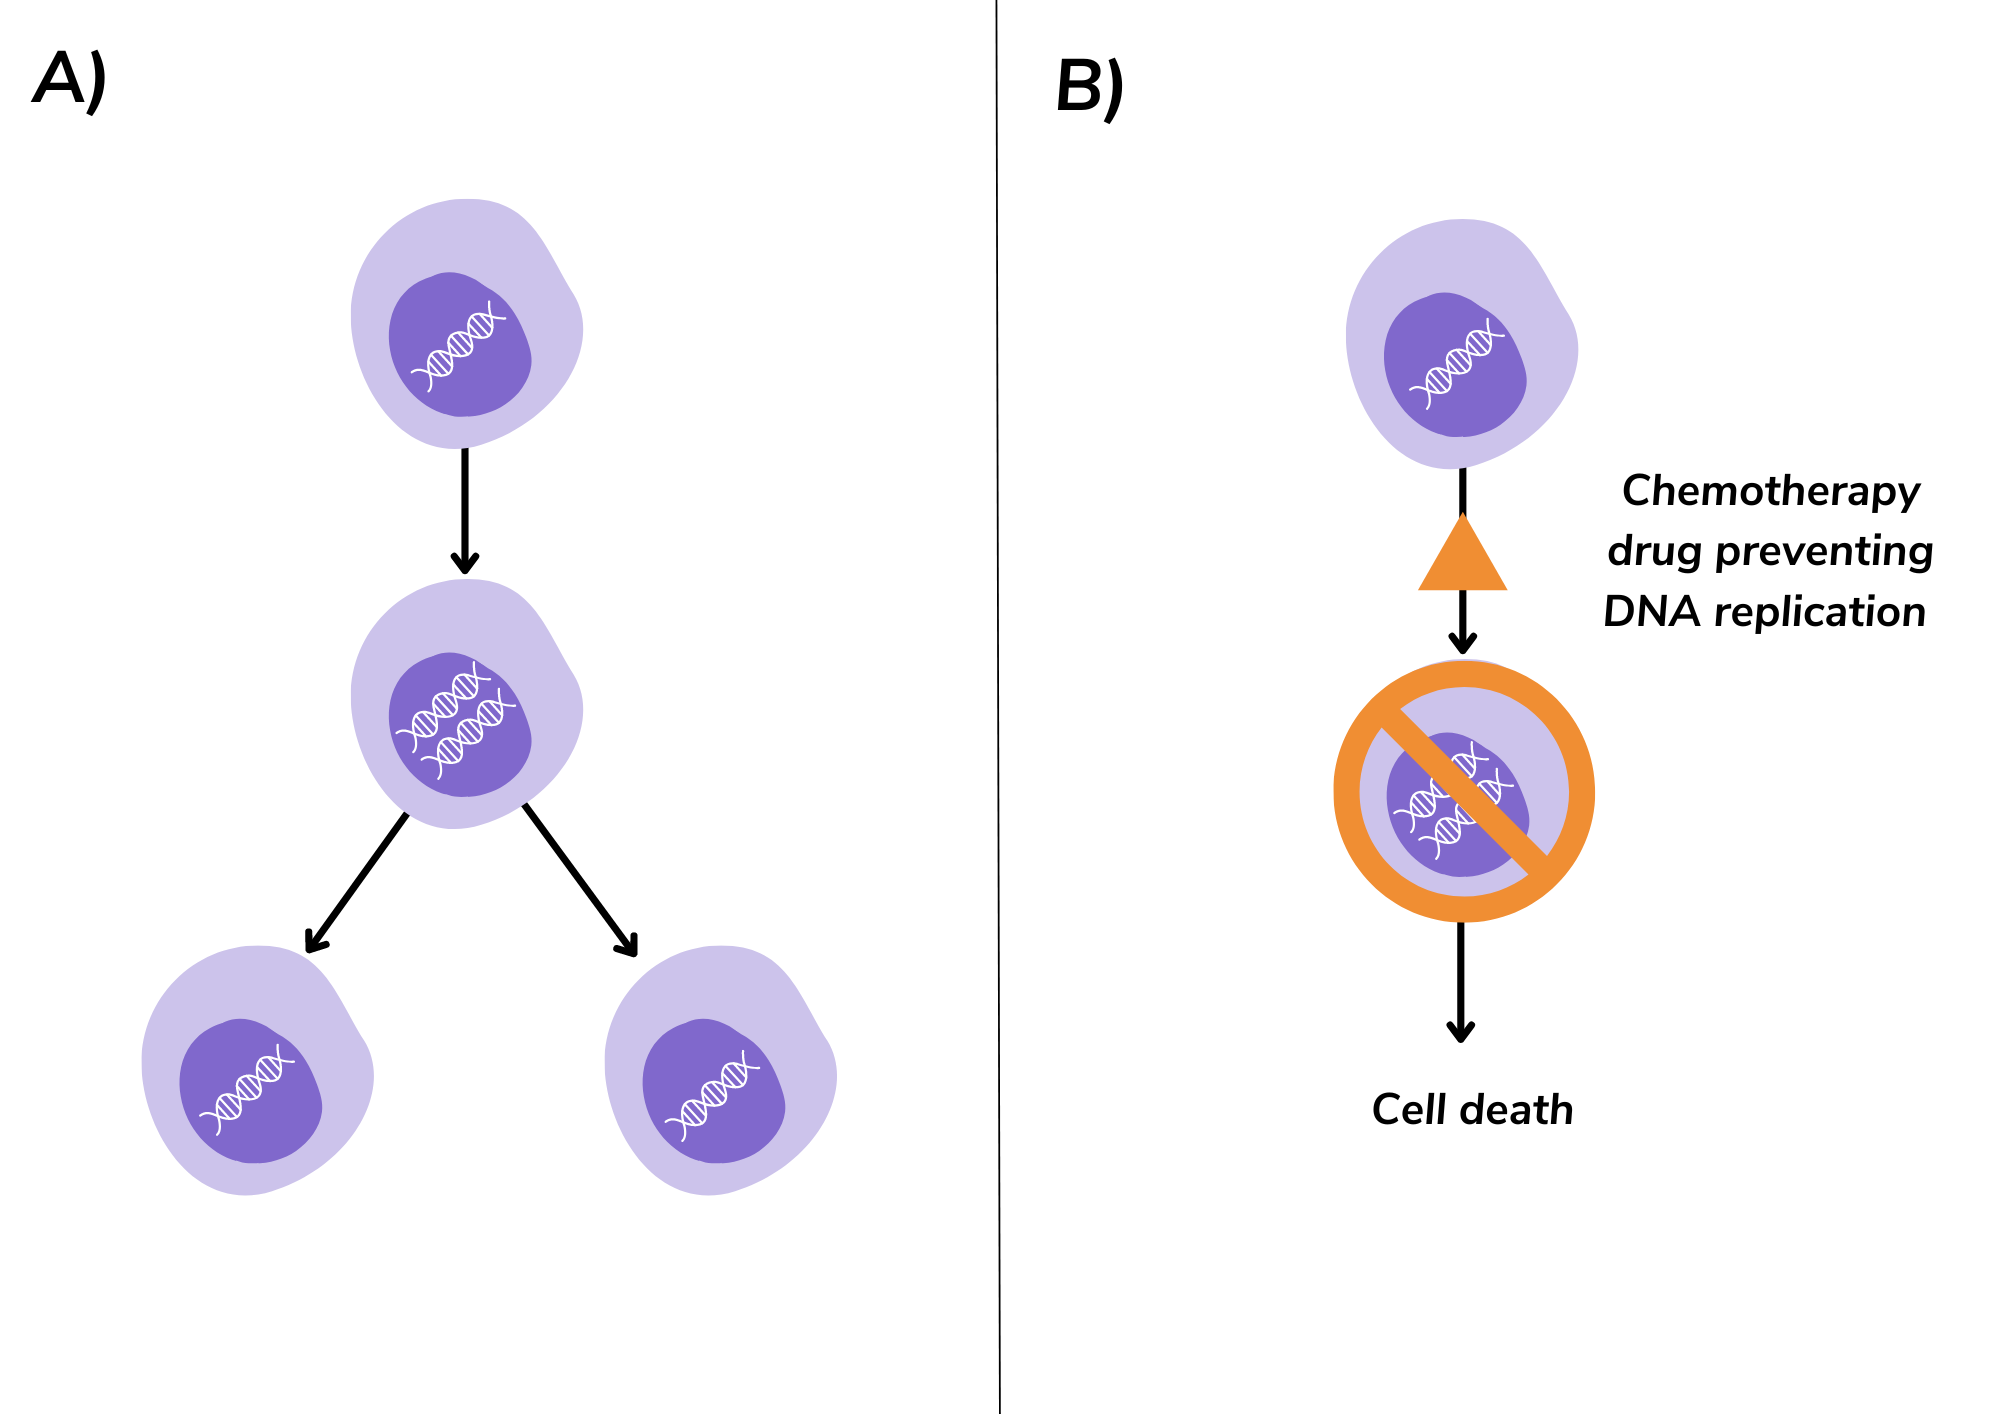 A diagram comparing the normal cell division process and how breast cancer chemotherapy treatment affects the cell division process by preventing DNA replication, leading to cell death.